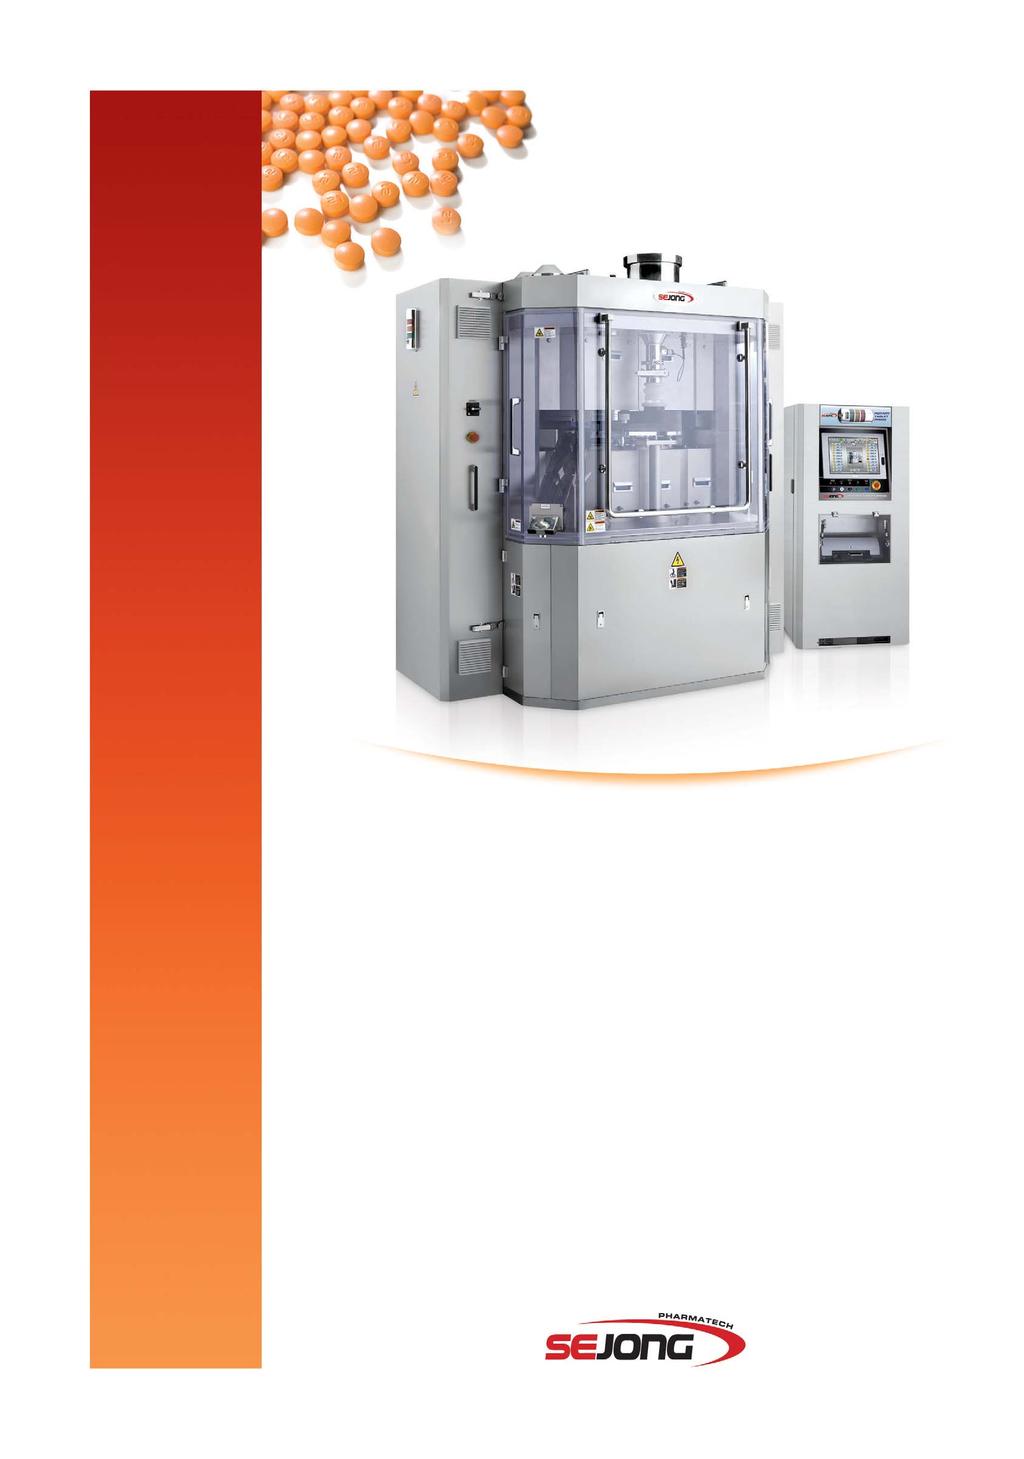 HRC-S Series New HRC-S series rotary tablet press is a representative tablet press line of Sejong Pharmatech.